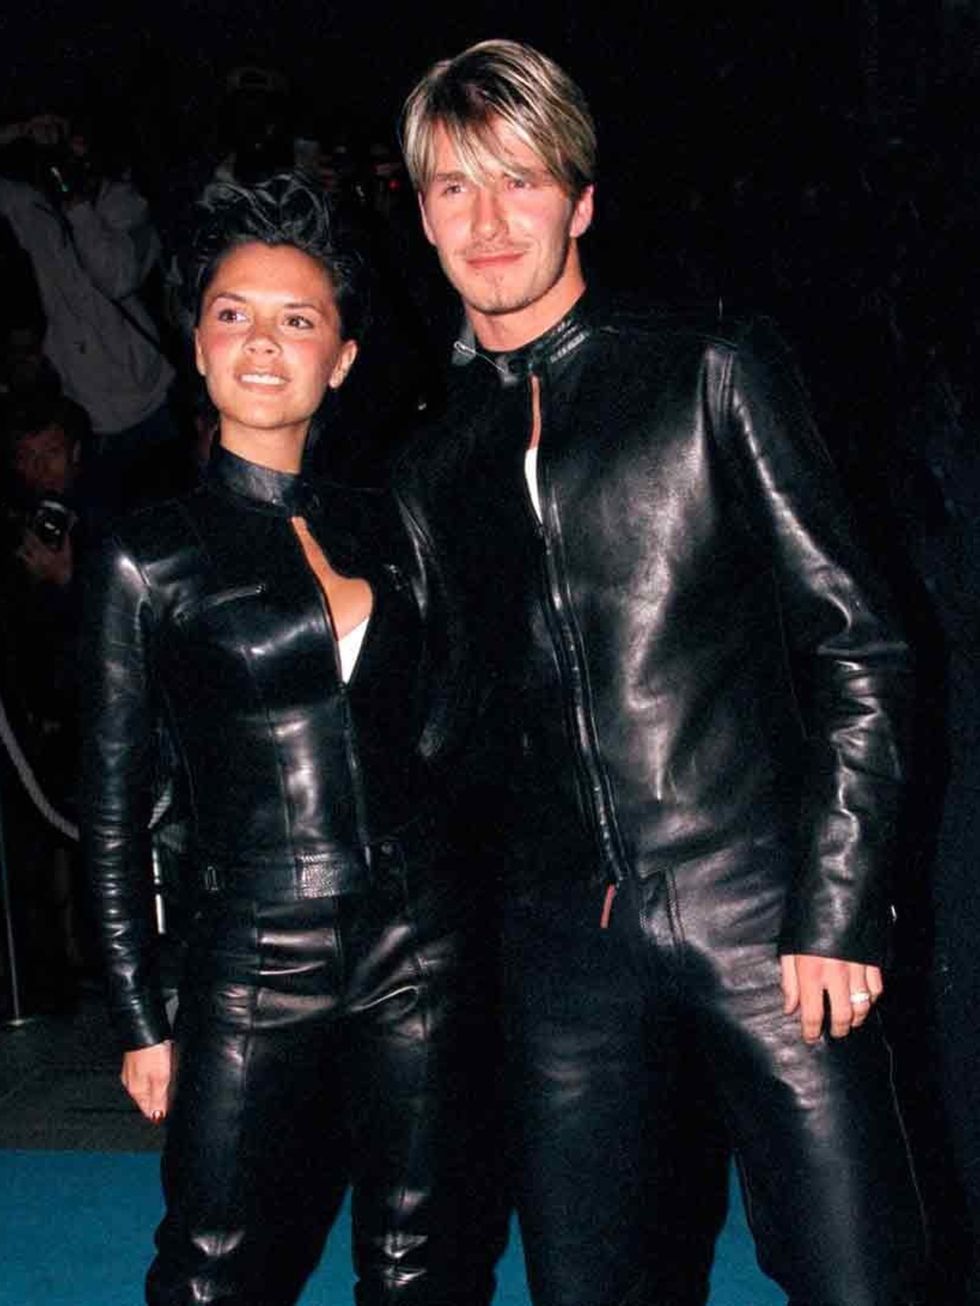 <p>She used to dress like this - and she became a style icon anyway.</p><p><em>David and Victoria Beckham at the Versace Club Gaga Party in London, 1999.</em></p><p><a href="http://www.elleuk.com/star-style/celebrity-style-files/victoria-beckham-style"></